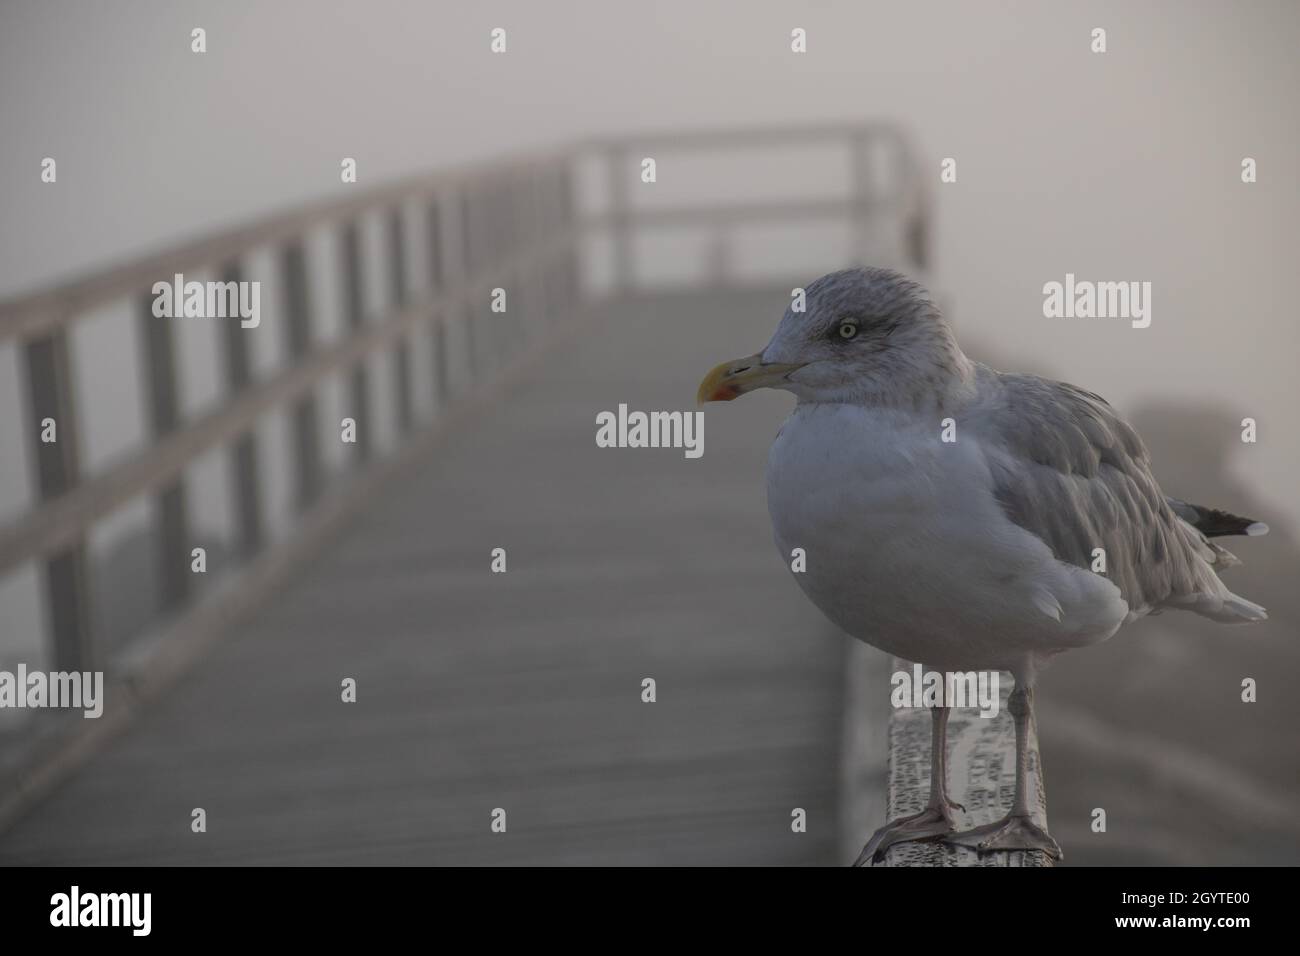 White gull on a scandinavian beach standing on a wooden pier, looking to the left side Stock Photo